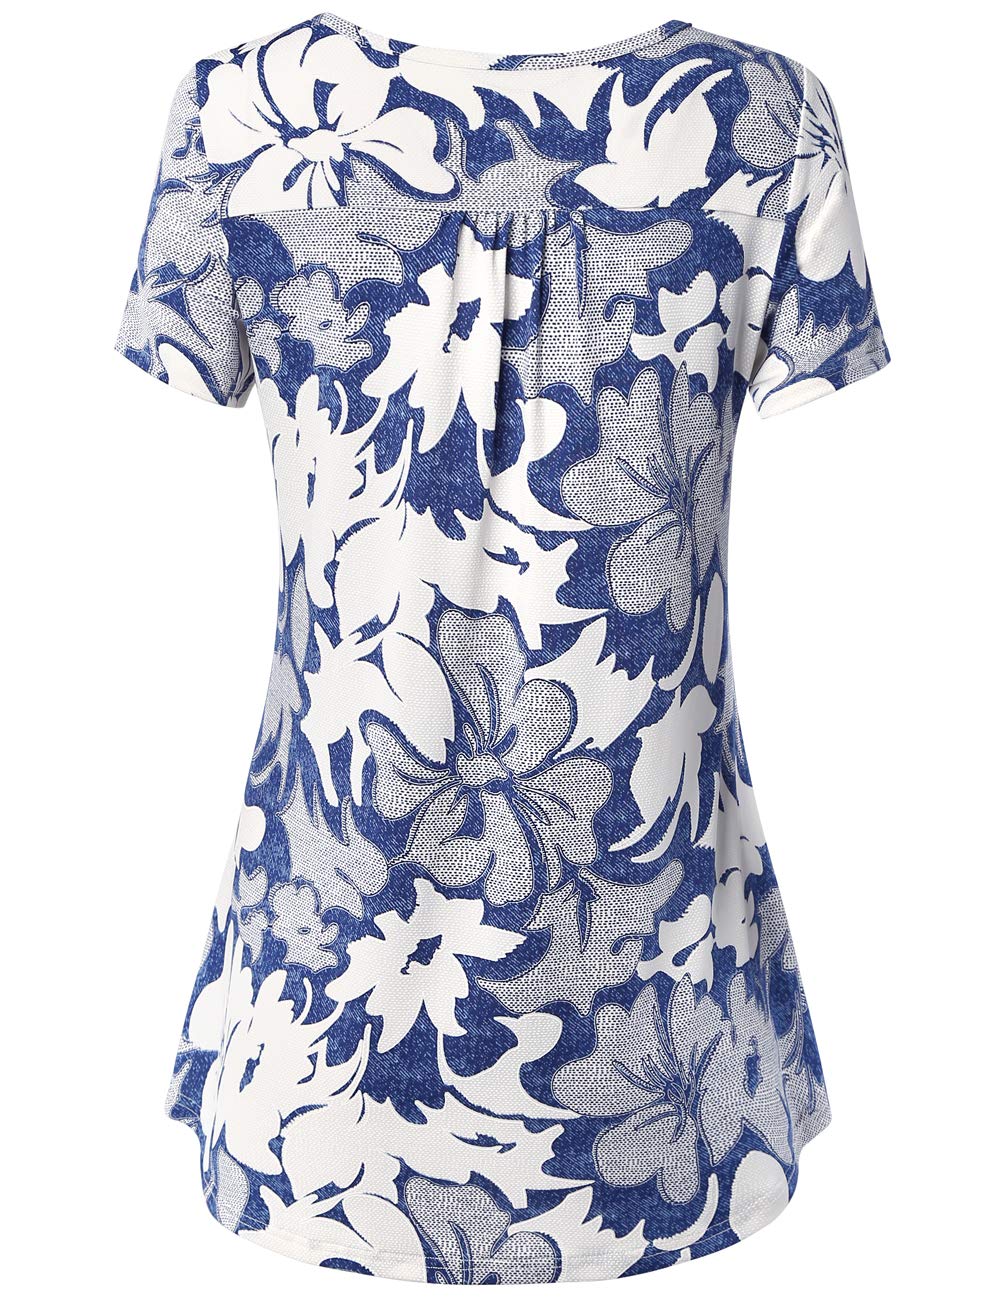 BAISHENGGT Blue Whtie Floral Women's V Neck Buttons Pleated Flared Comfy Tunic Tops